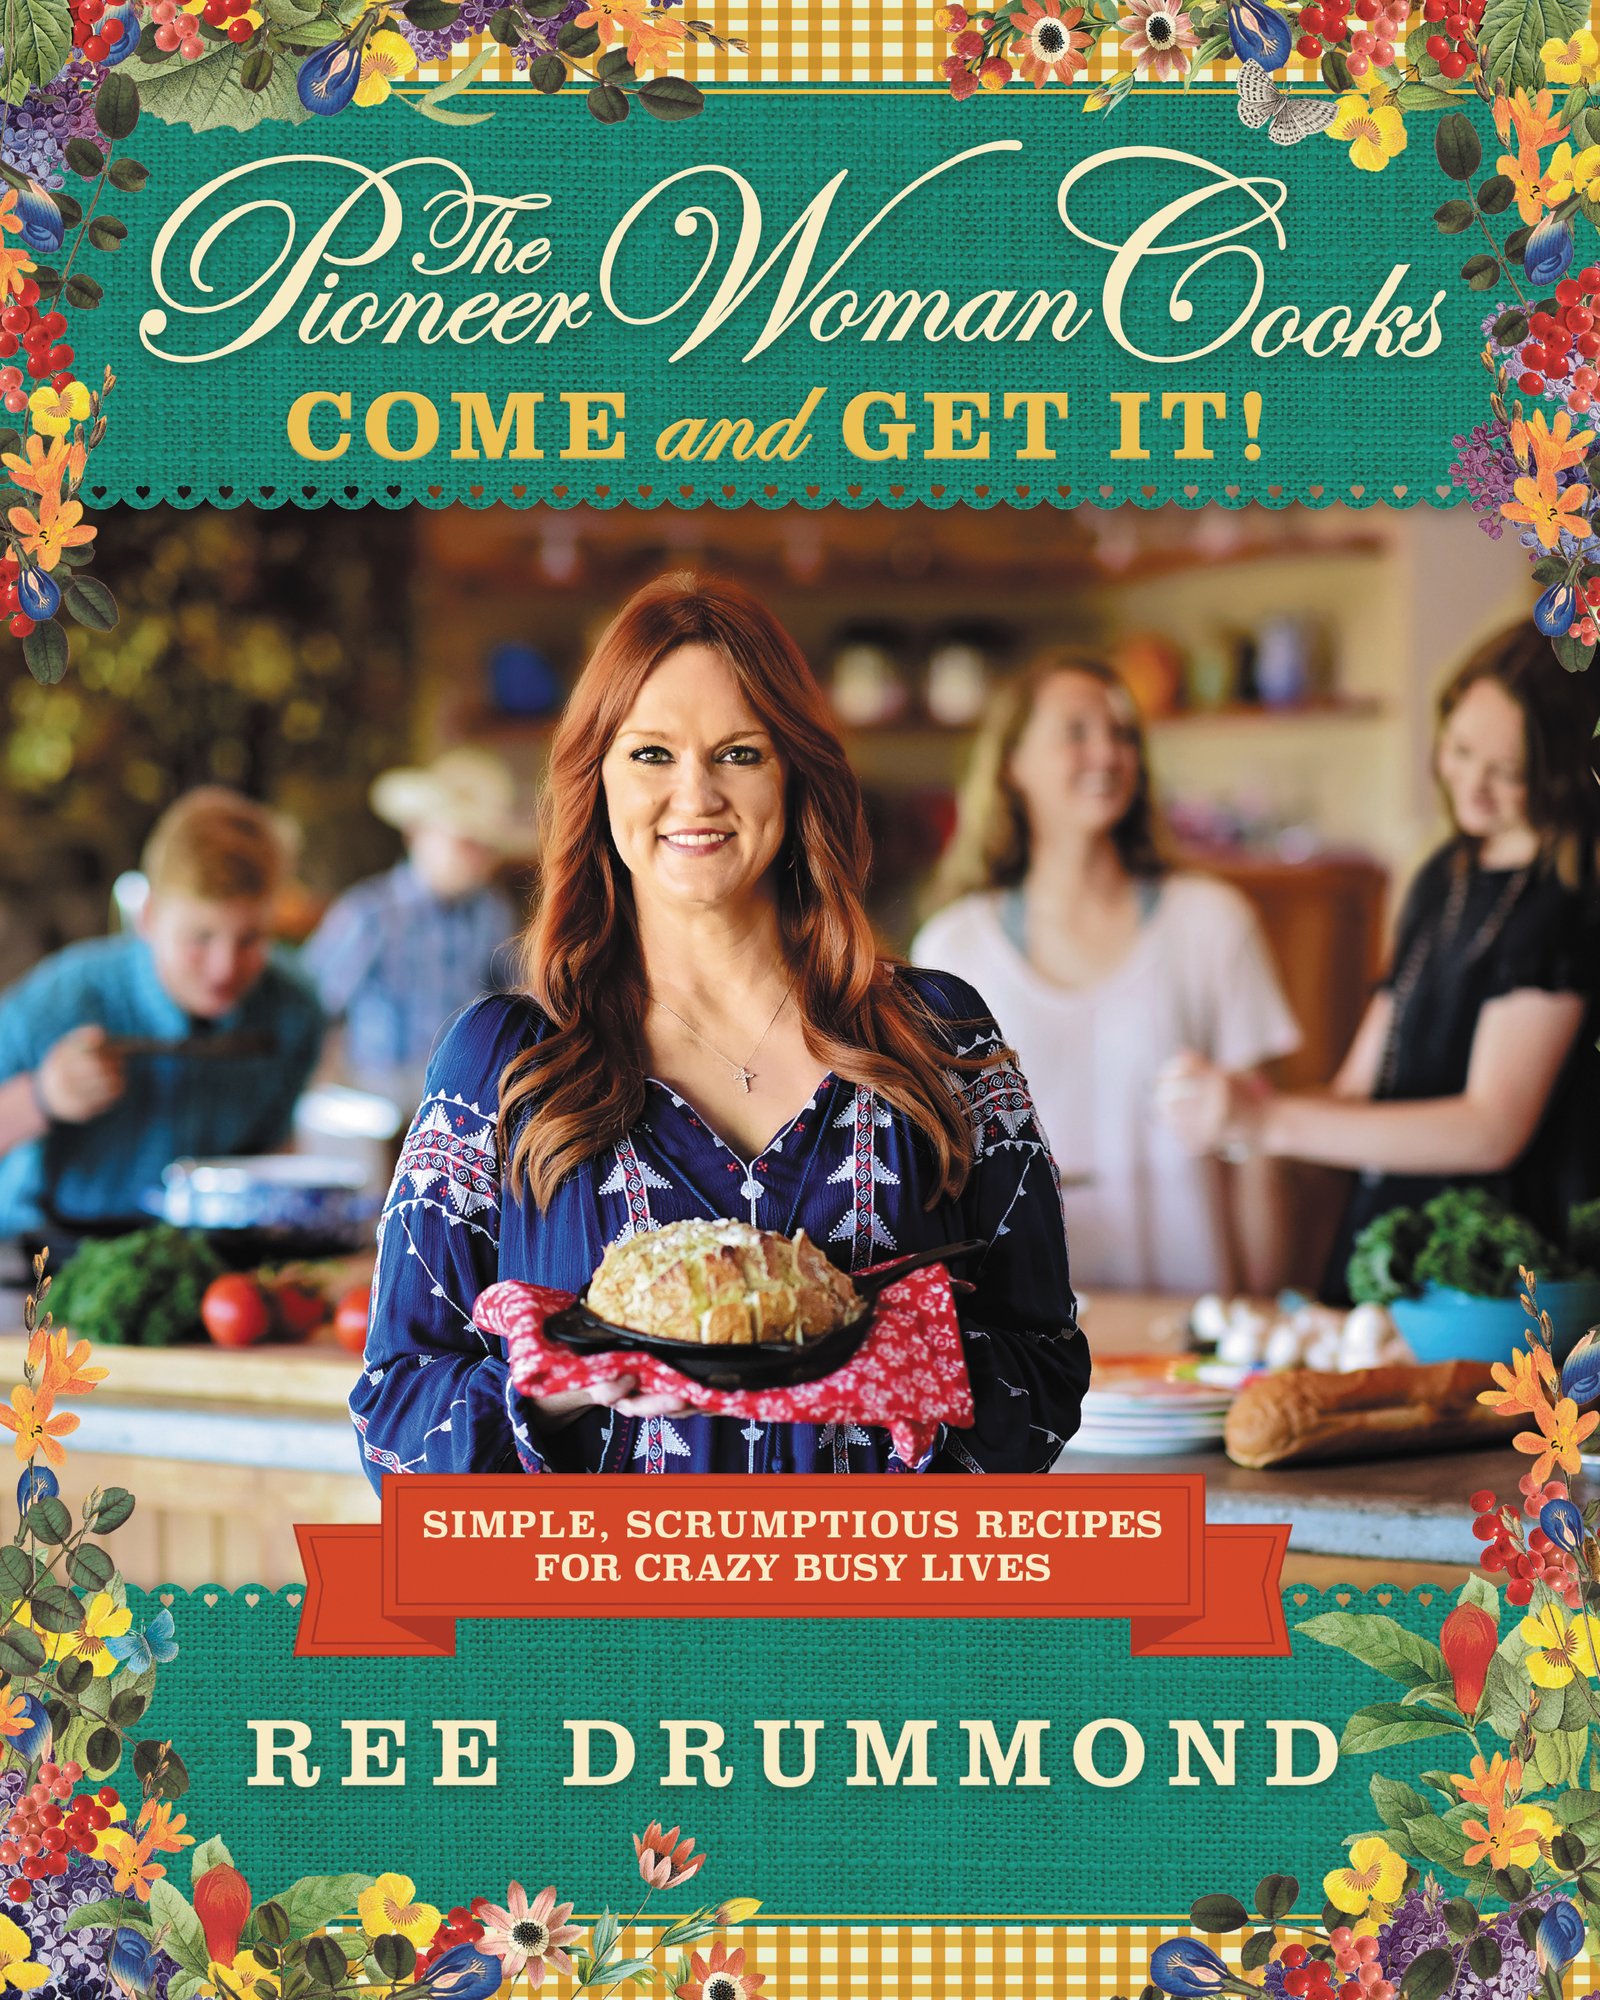 Ree Drummond and Get It” Book Signing Book Signing Central